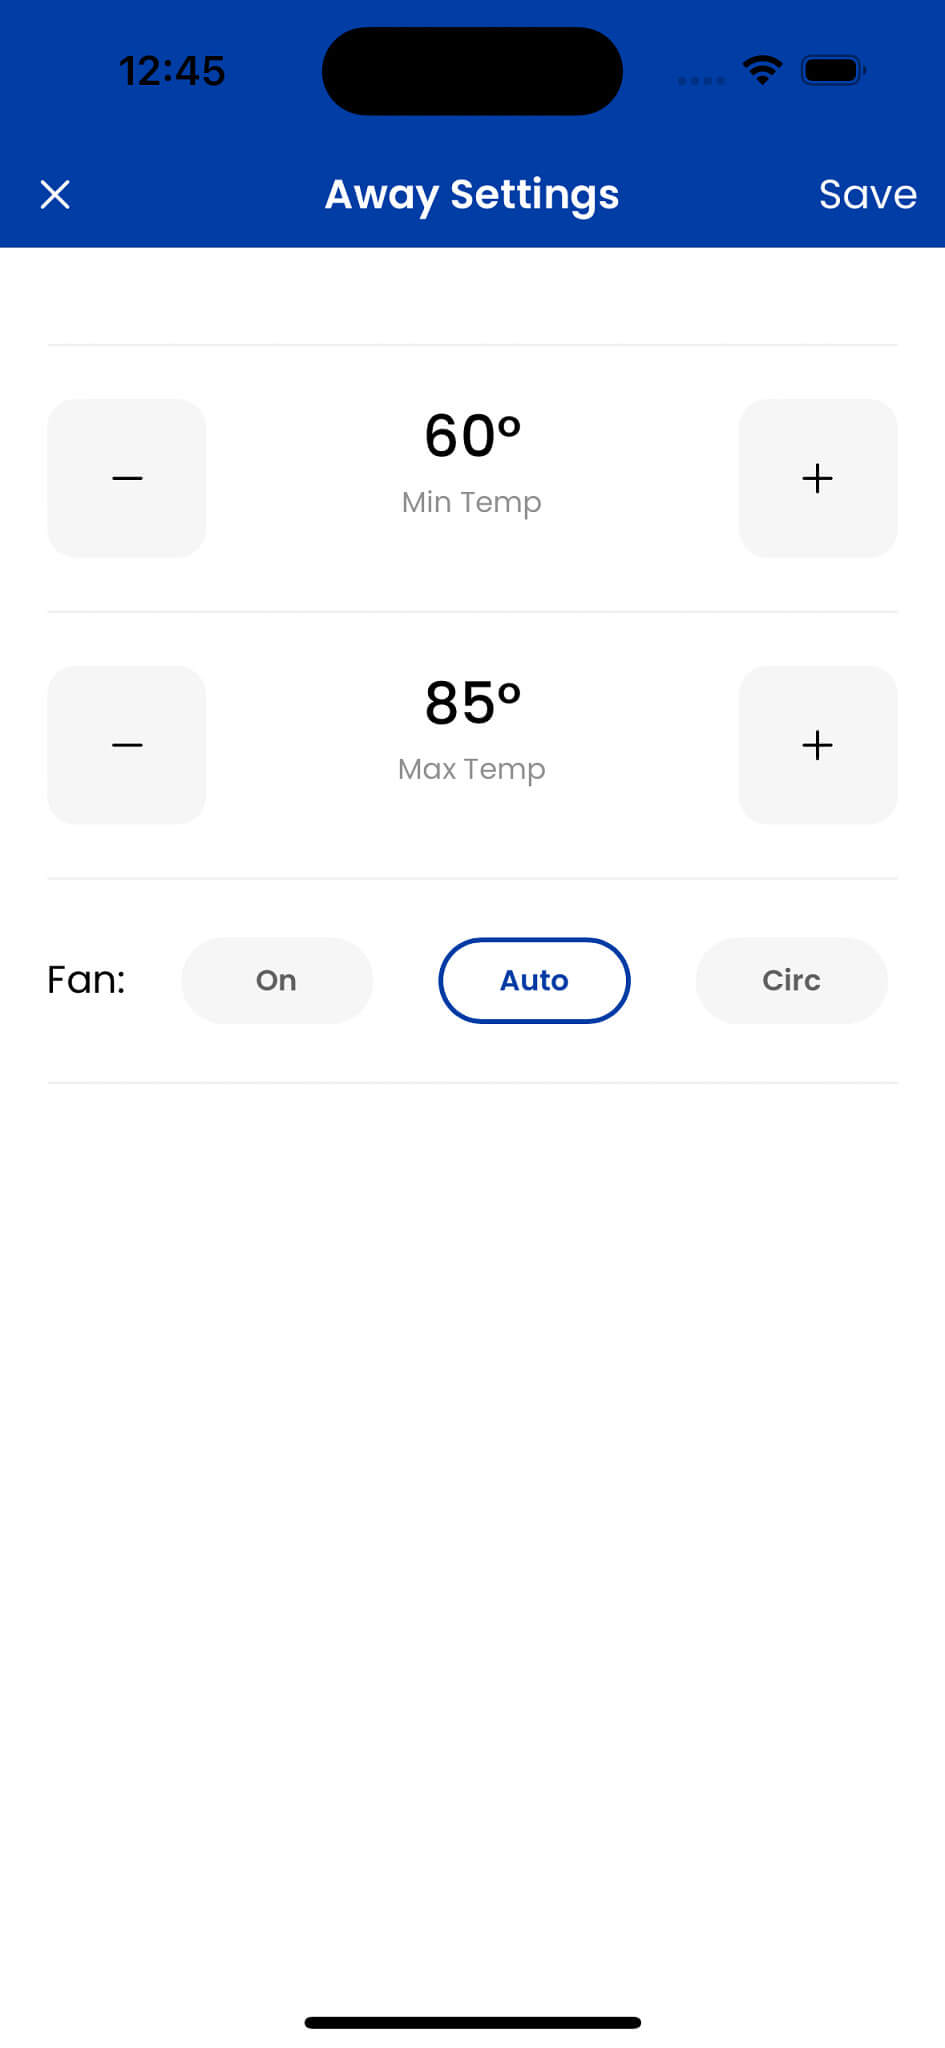 aprilaire wi fi thermostat app away settings screen user guide photo